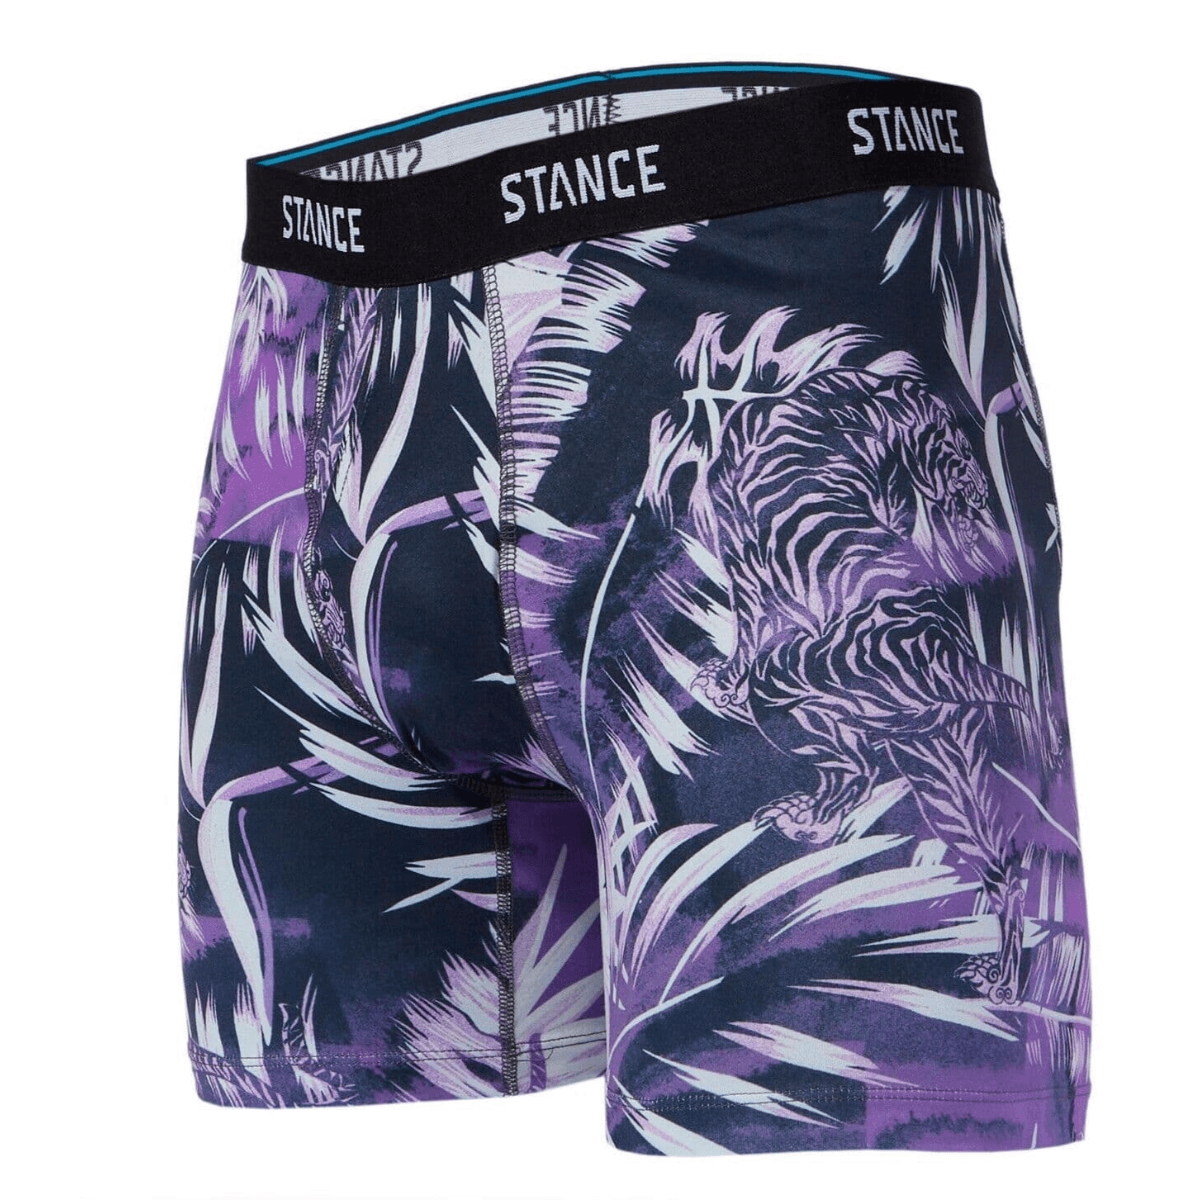 Stance - Stance Butter Blend Boxer Brief with Wholester in Anza - Stone